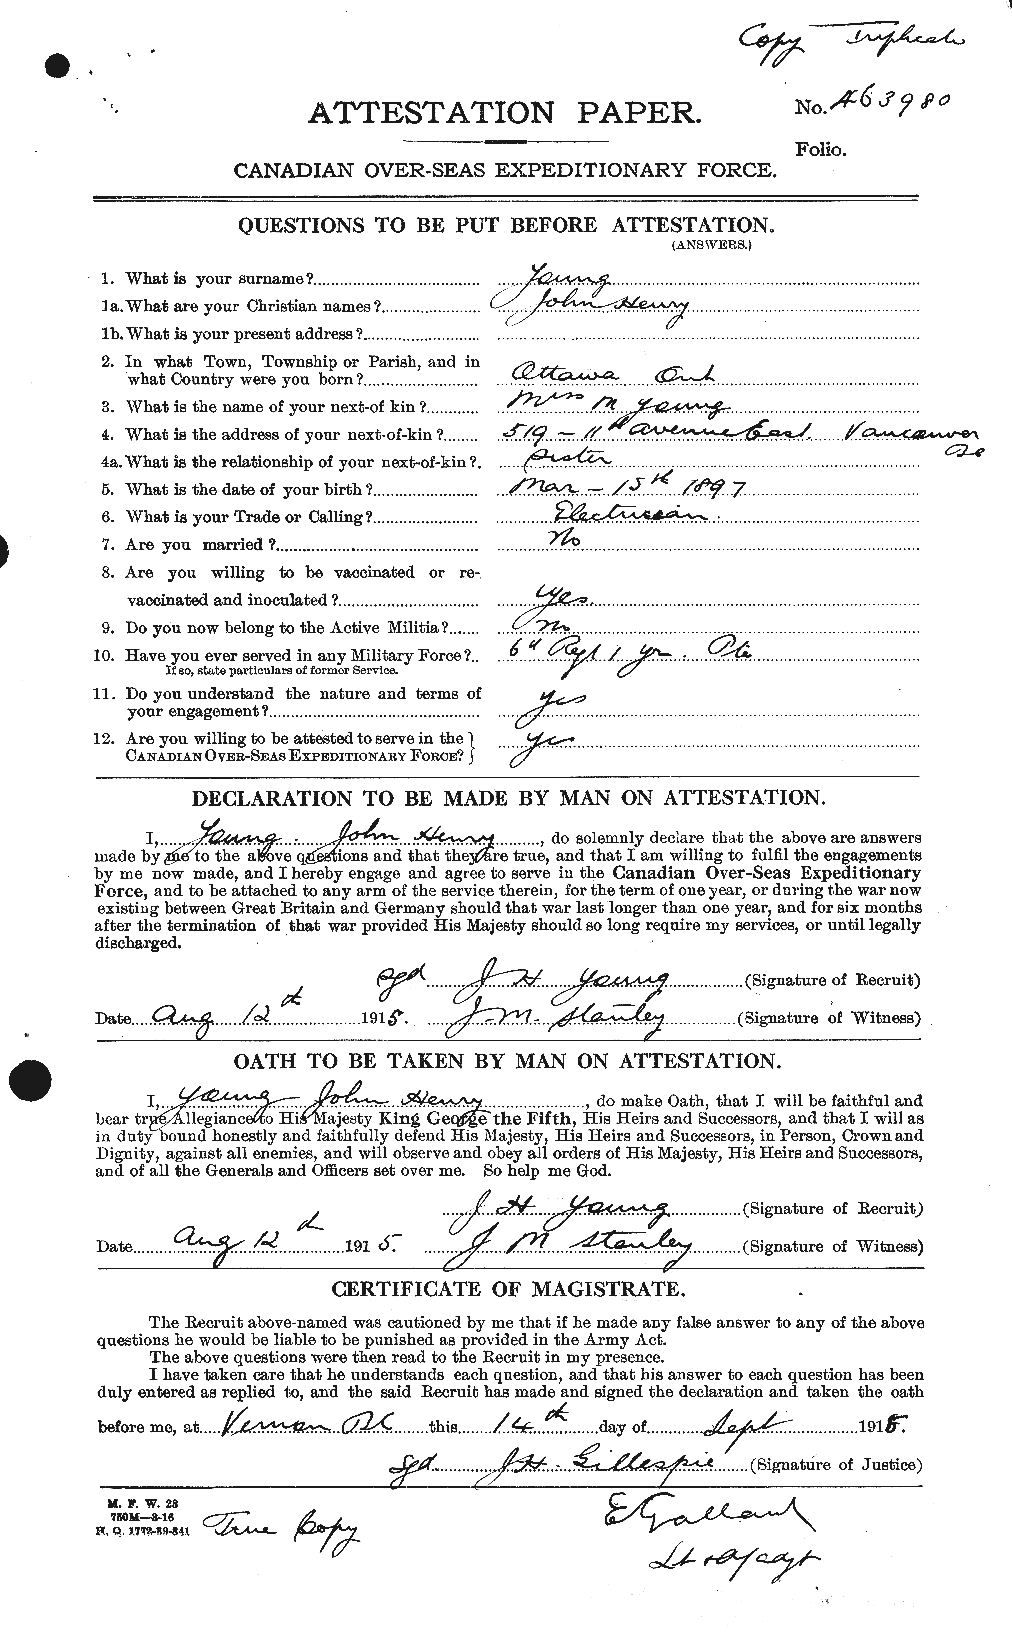 Personnel Records of the First World War - CEF 690769a